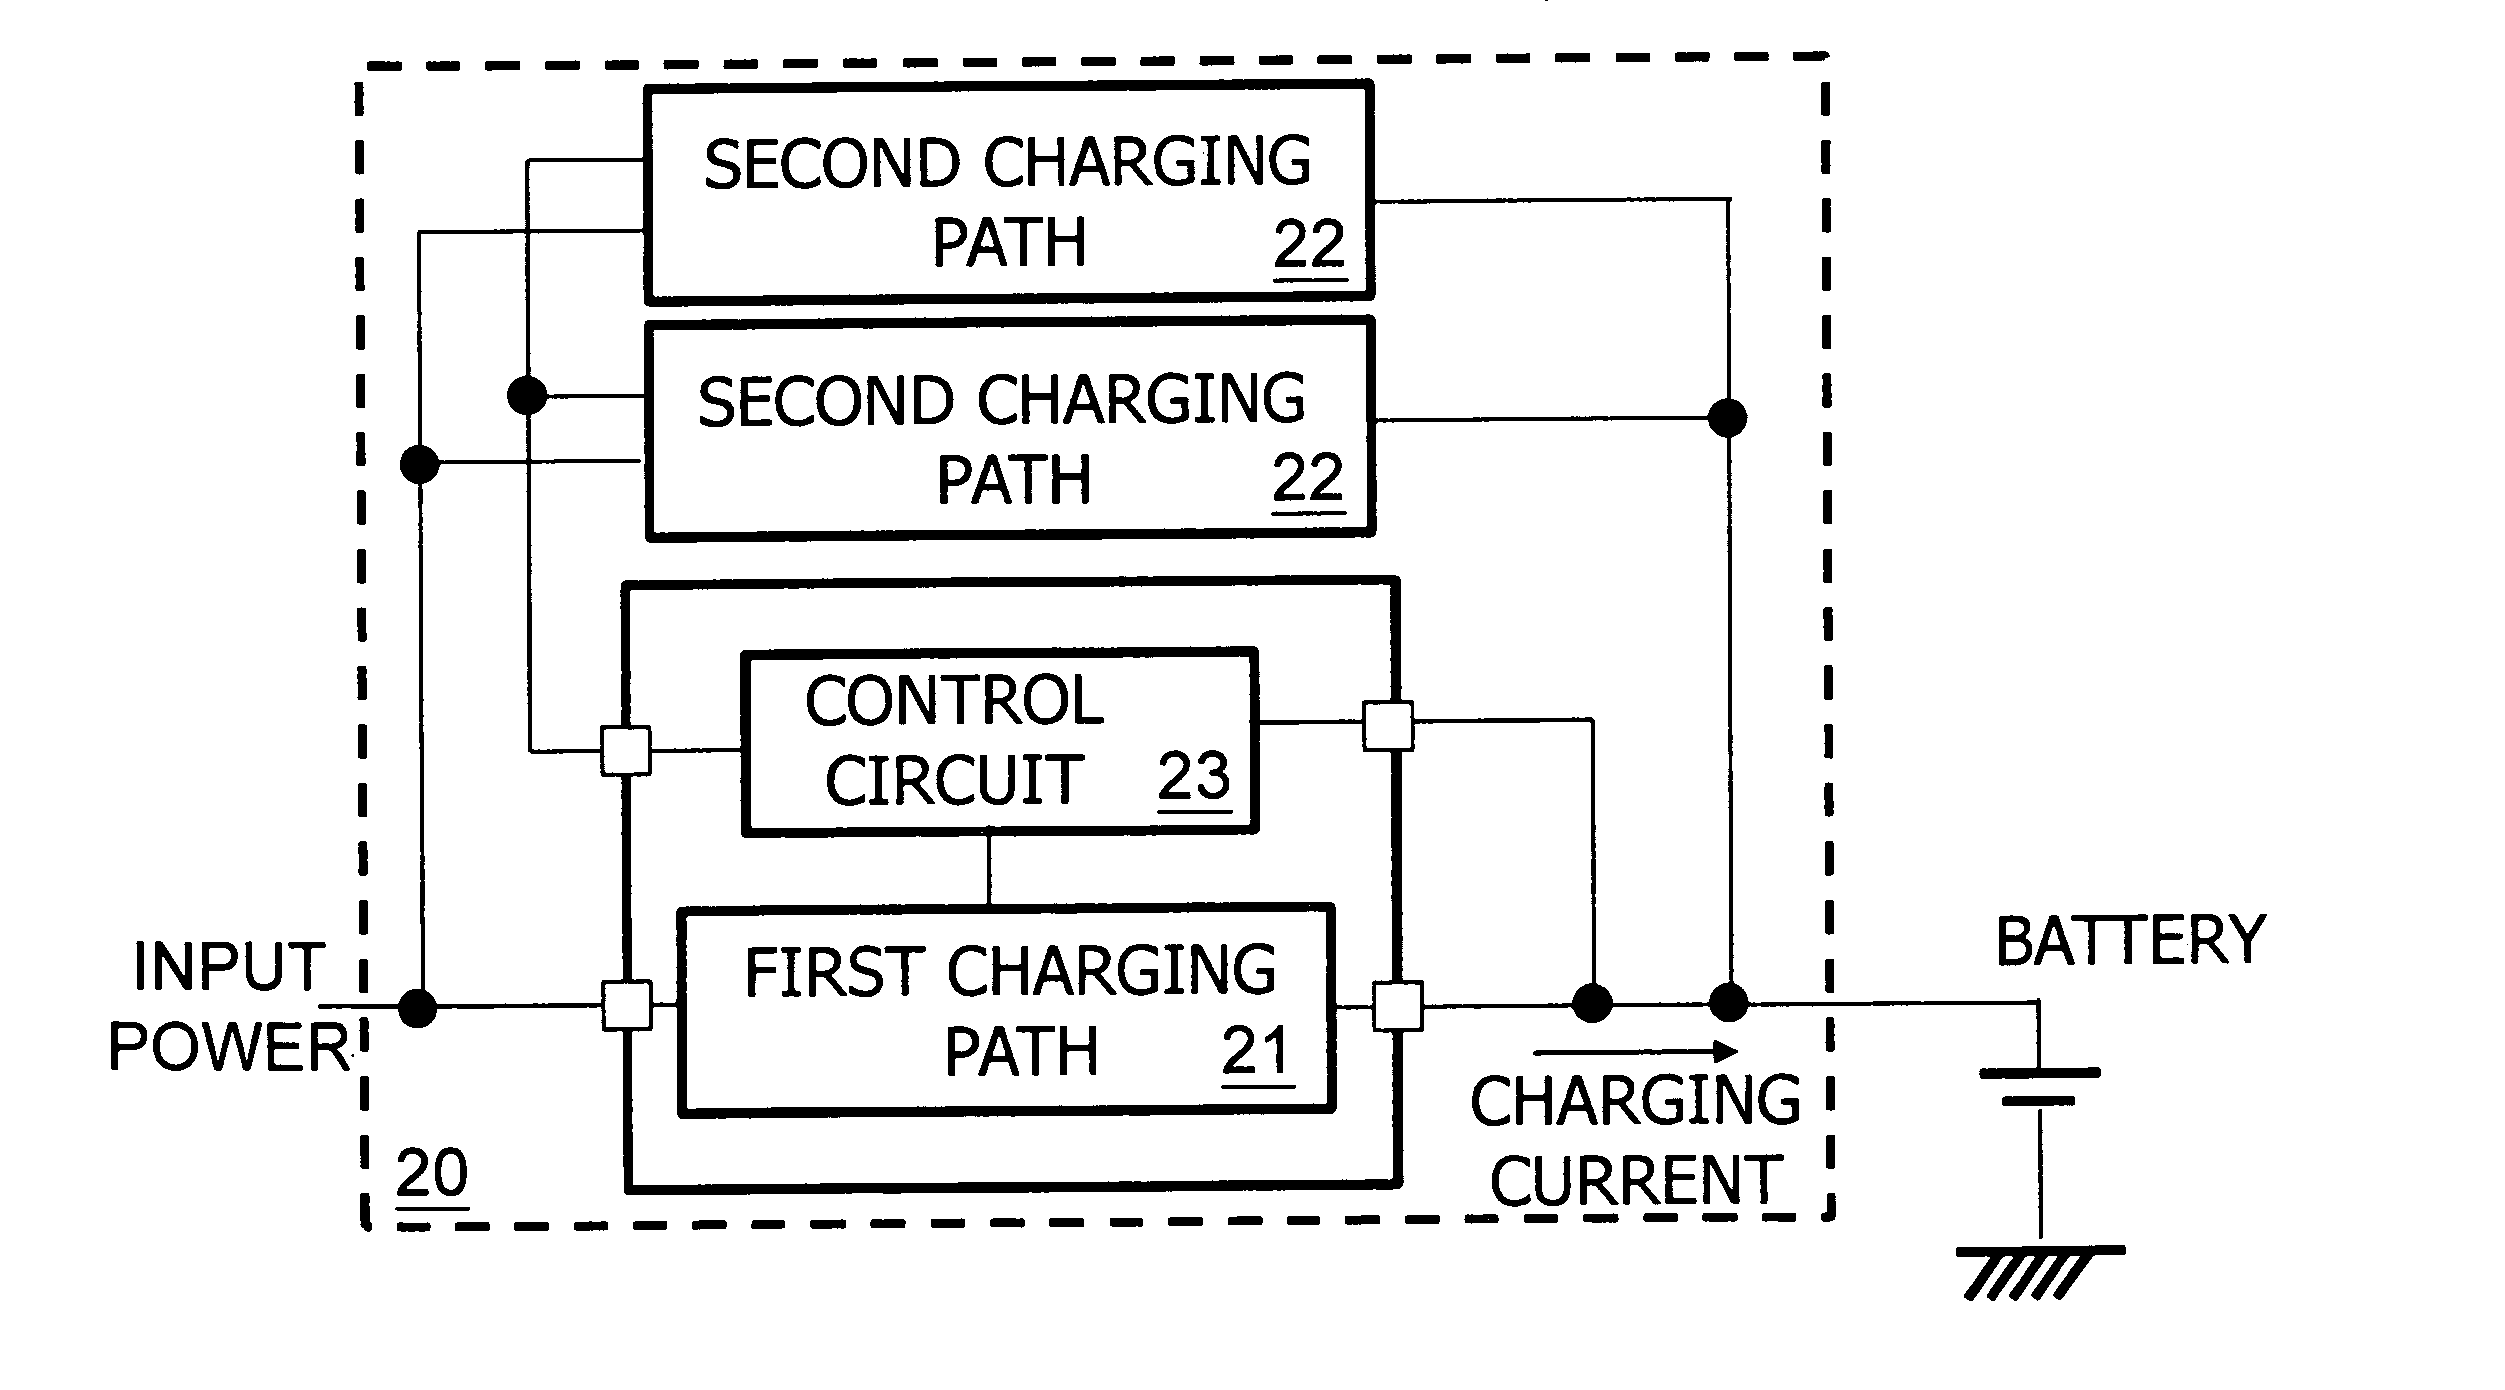 Charger circuit